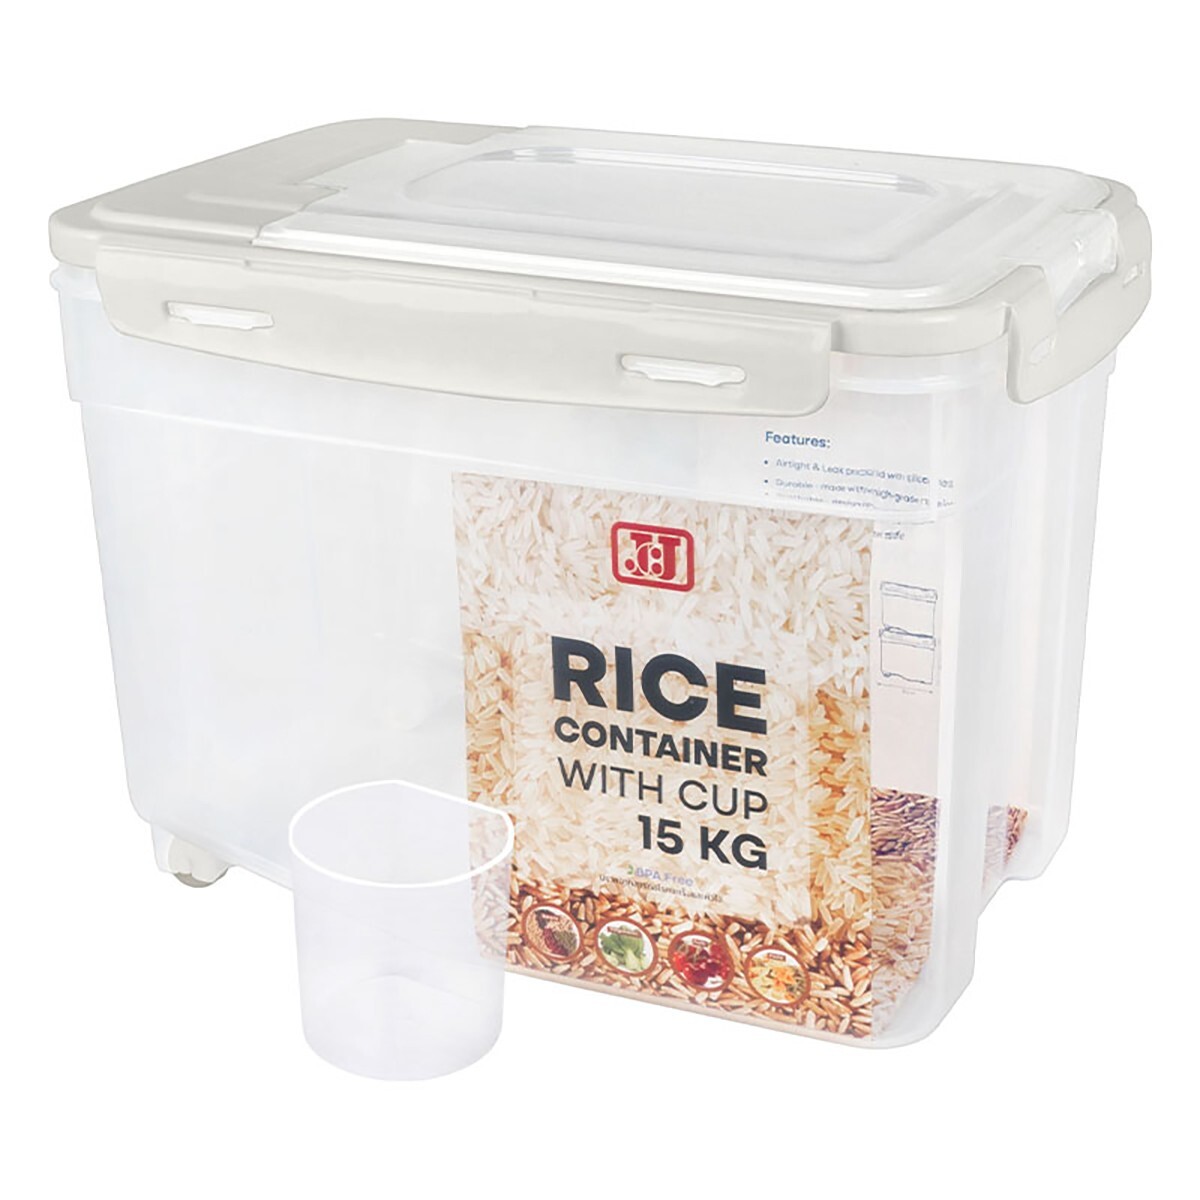 Jcj Rice Container 15Kg-1399